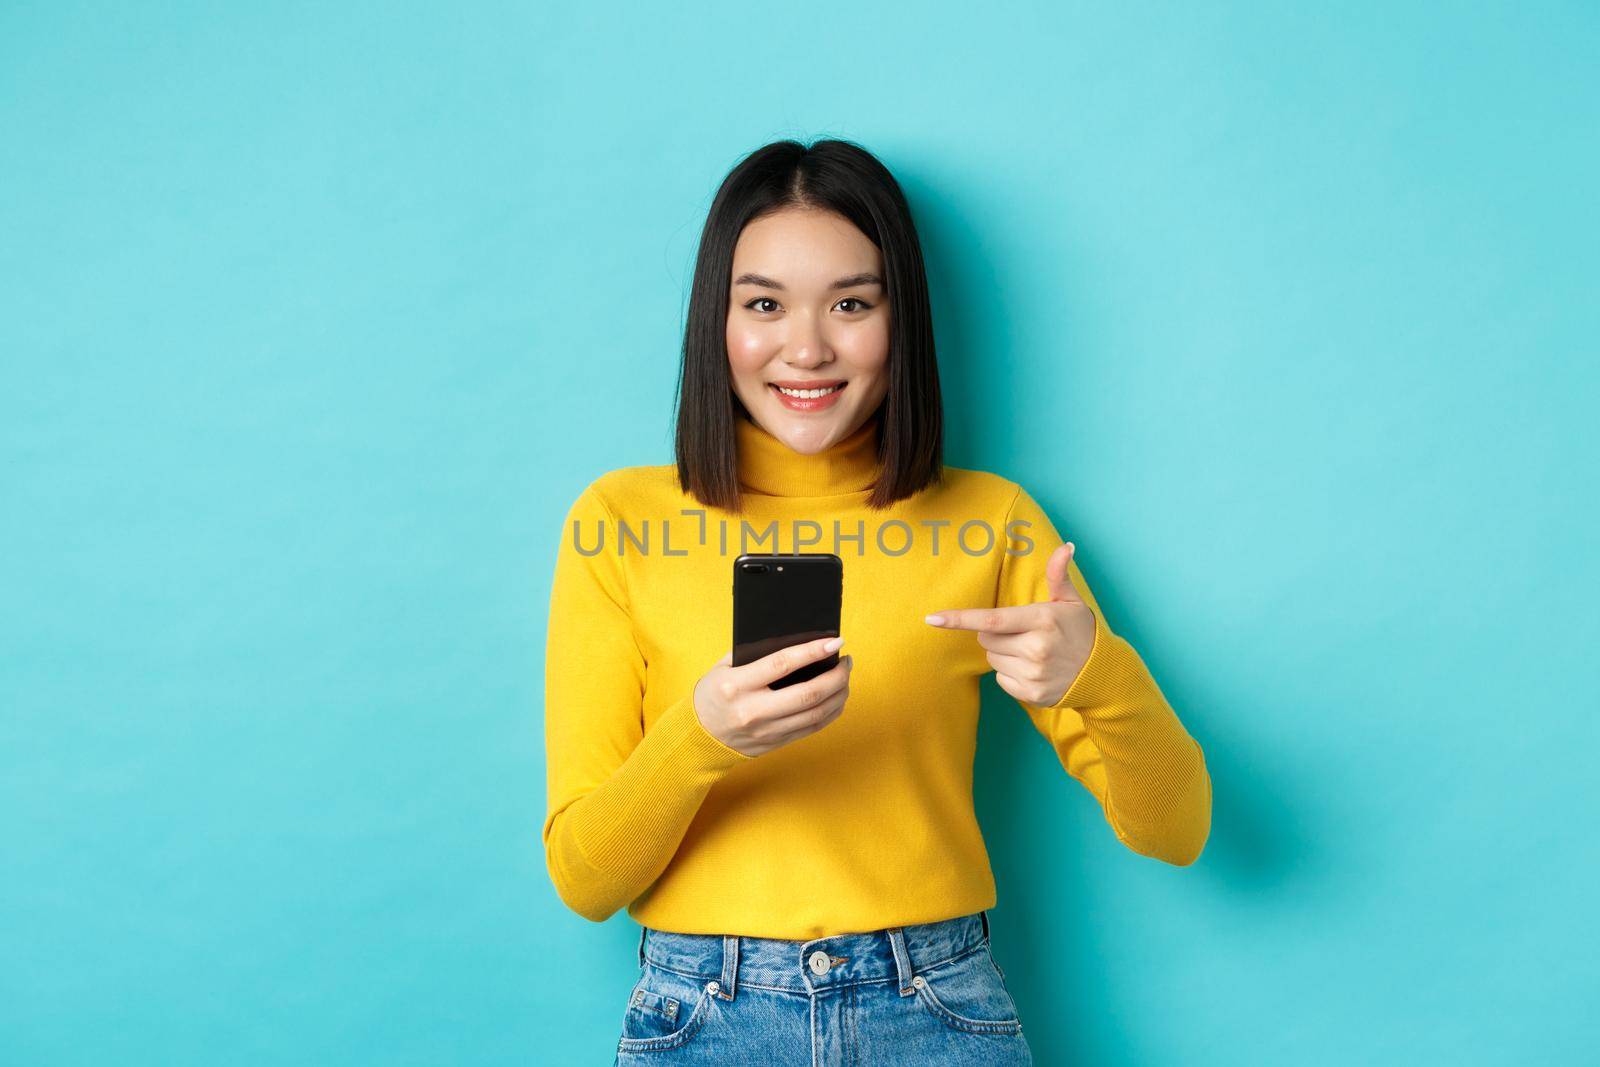 E-commerce and online shopping concept. Cute asian woman in yellow sweater pointing at smartphone, smiling at camera, standing over blue background.